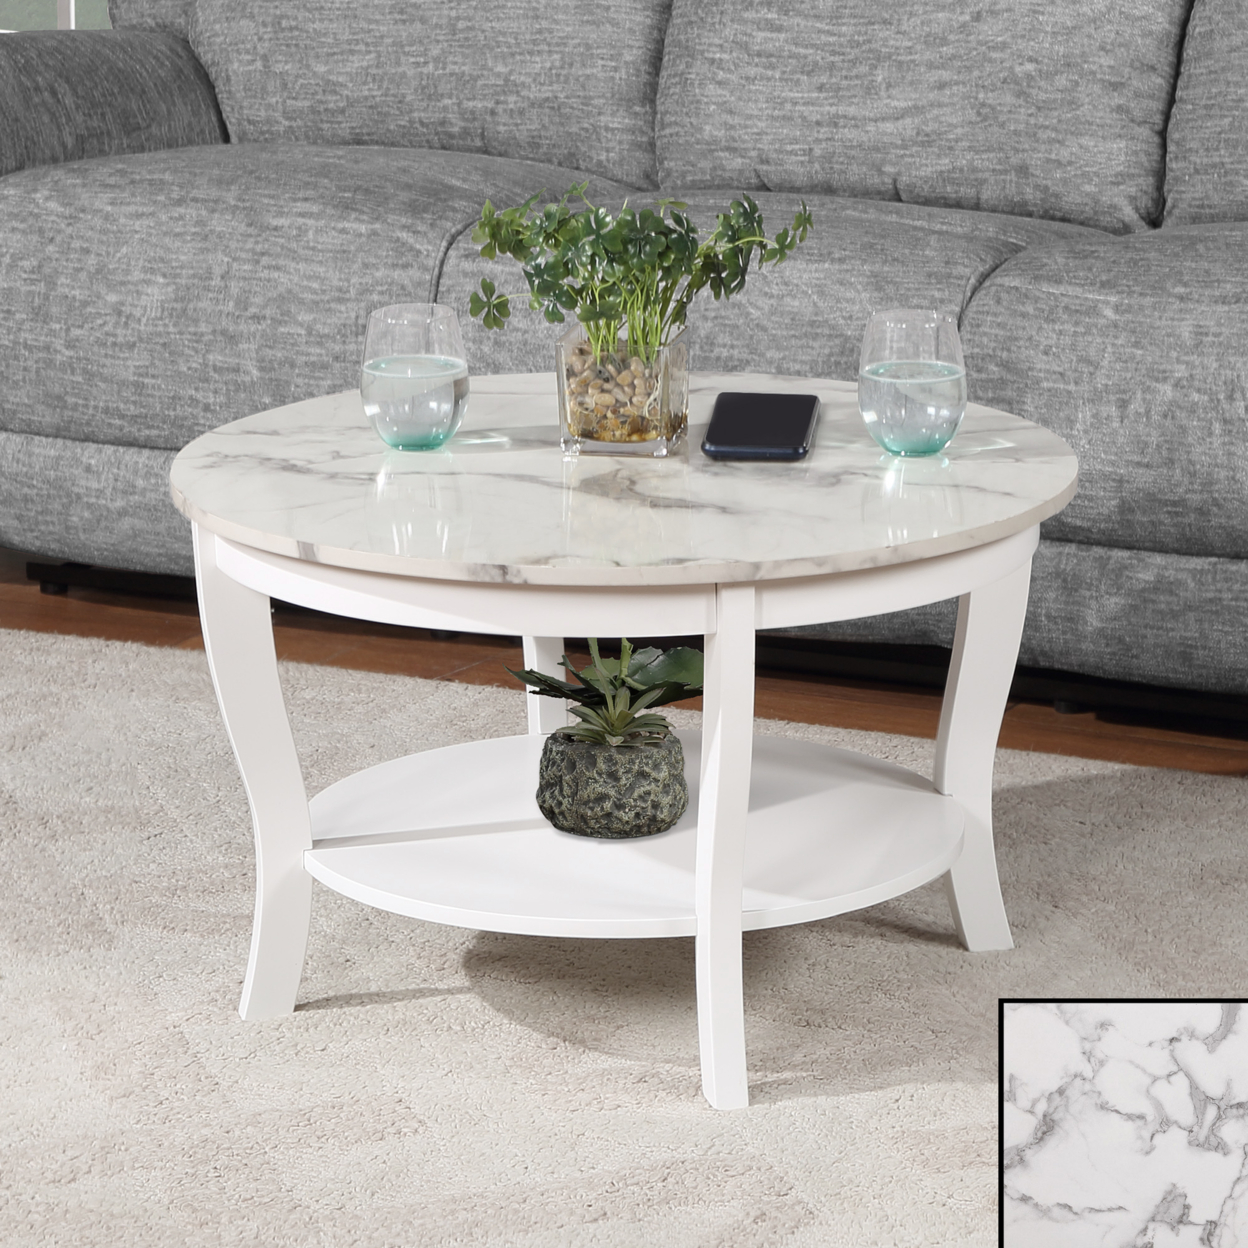 American Heritage Round Coffee Table with Shelf, Marble